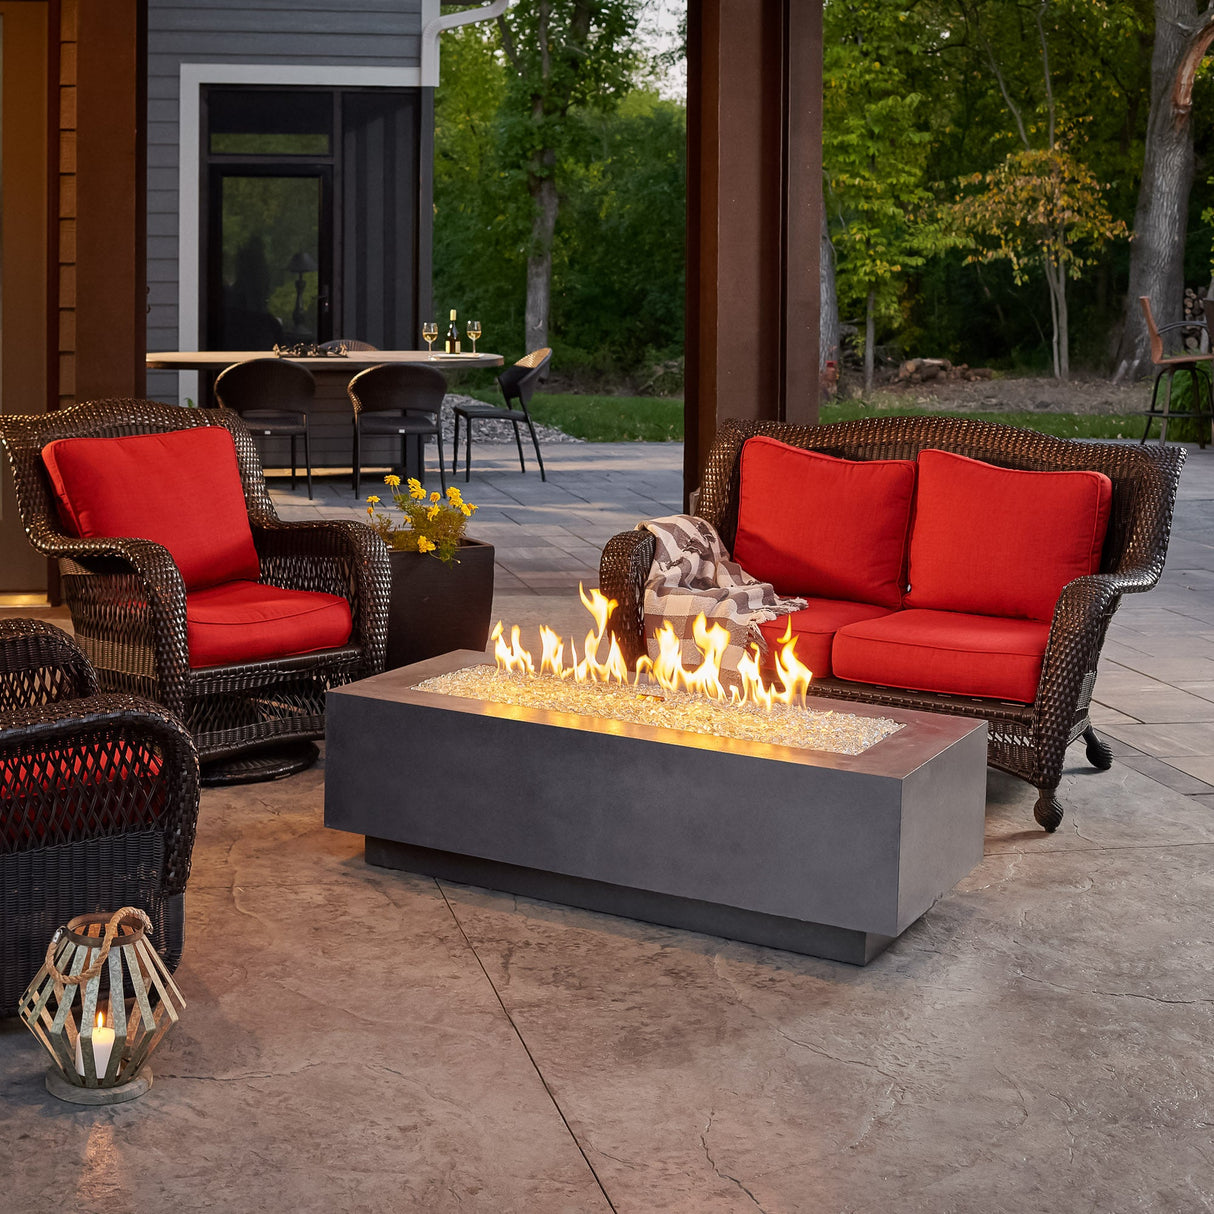 A Midnight Mist Cove Linear Gas Fire Pit Table 54" in an outdoor setting surrounded by patio furniture